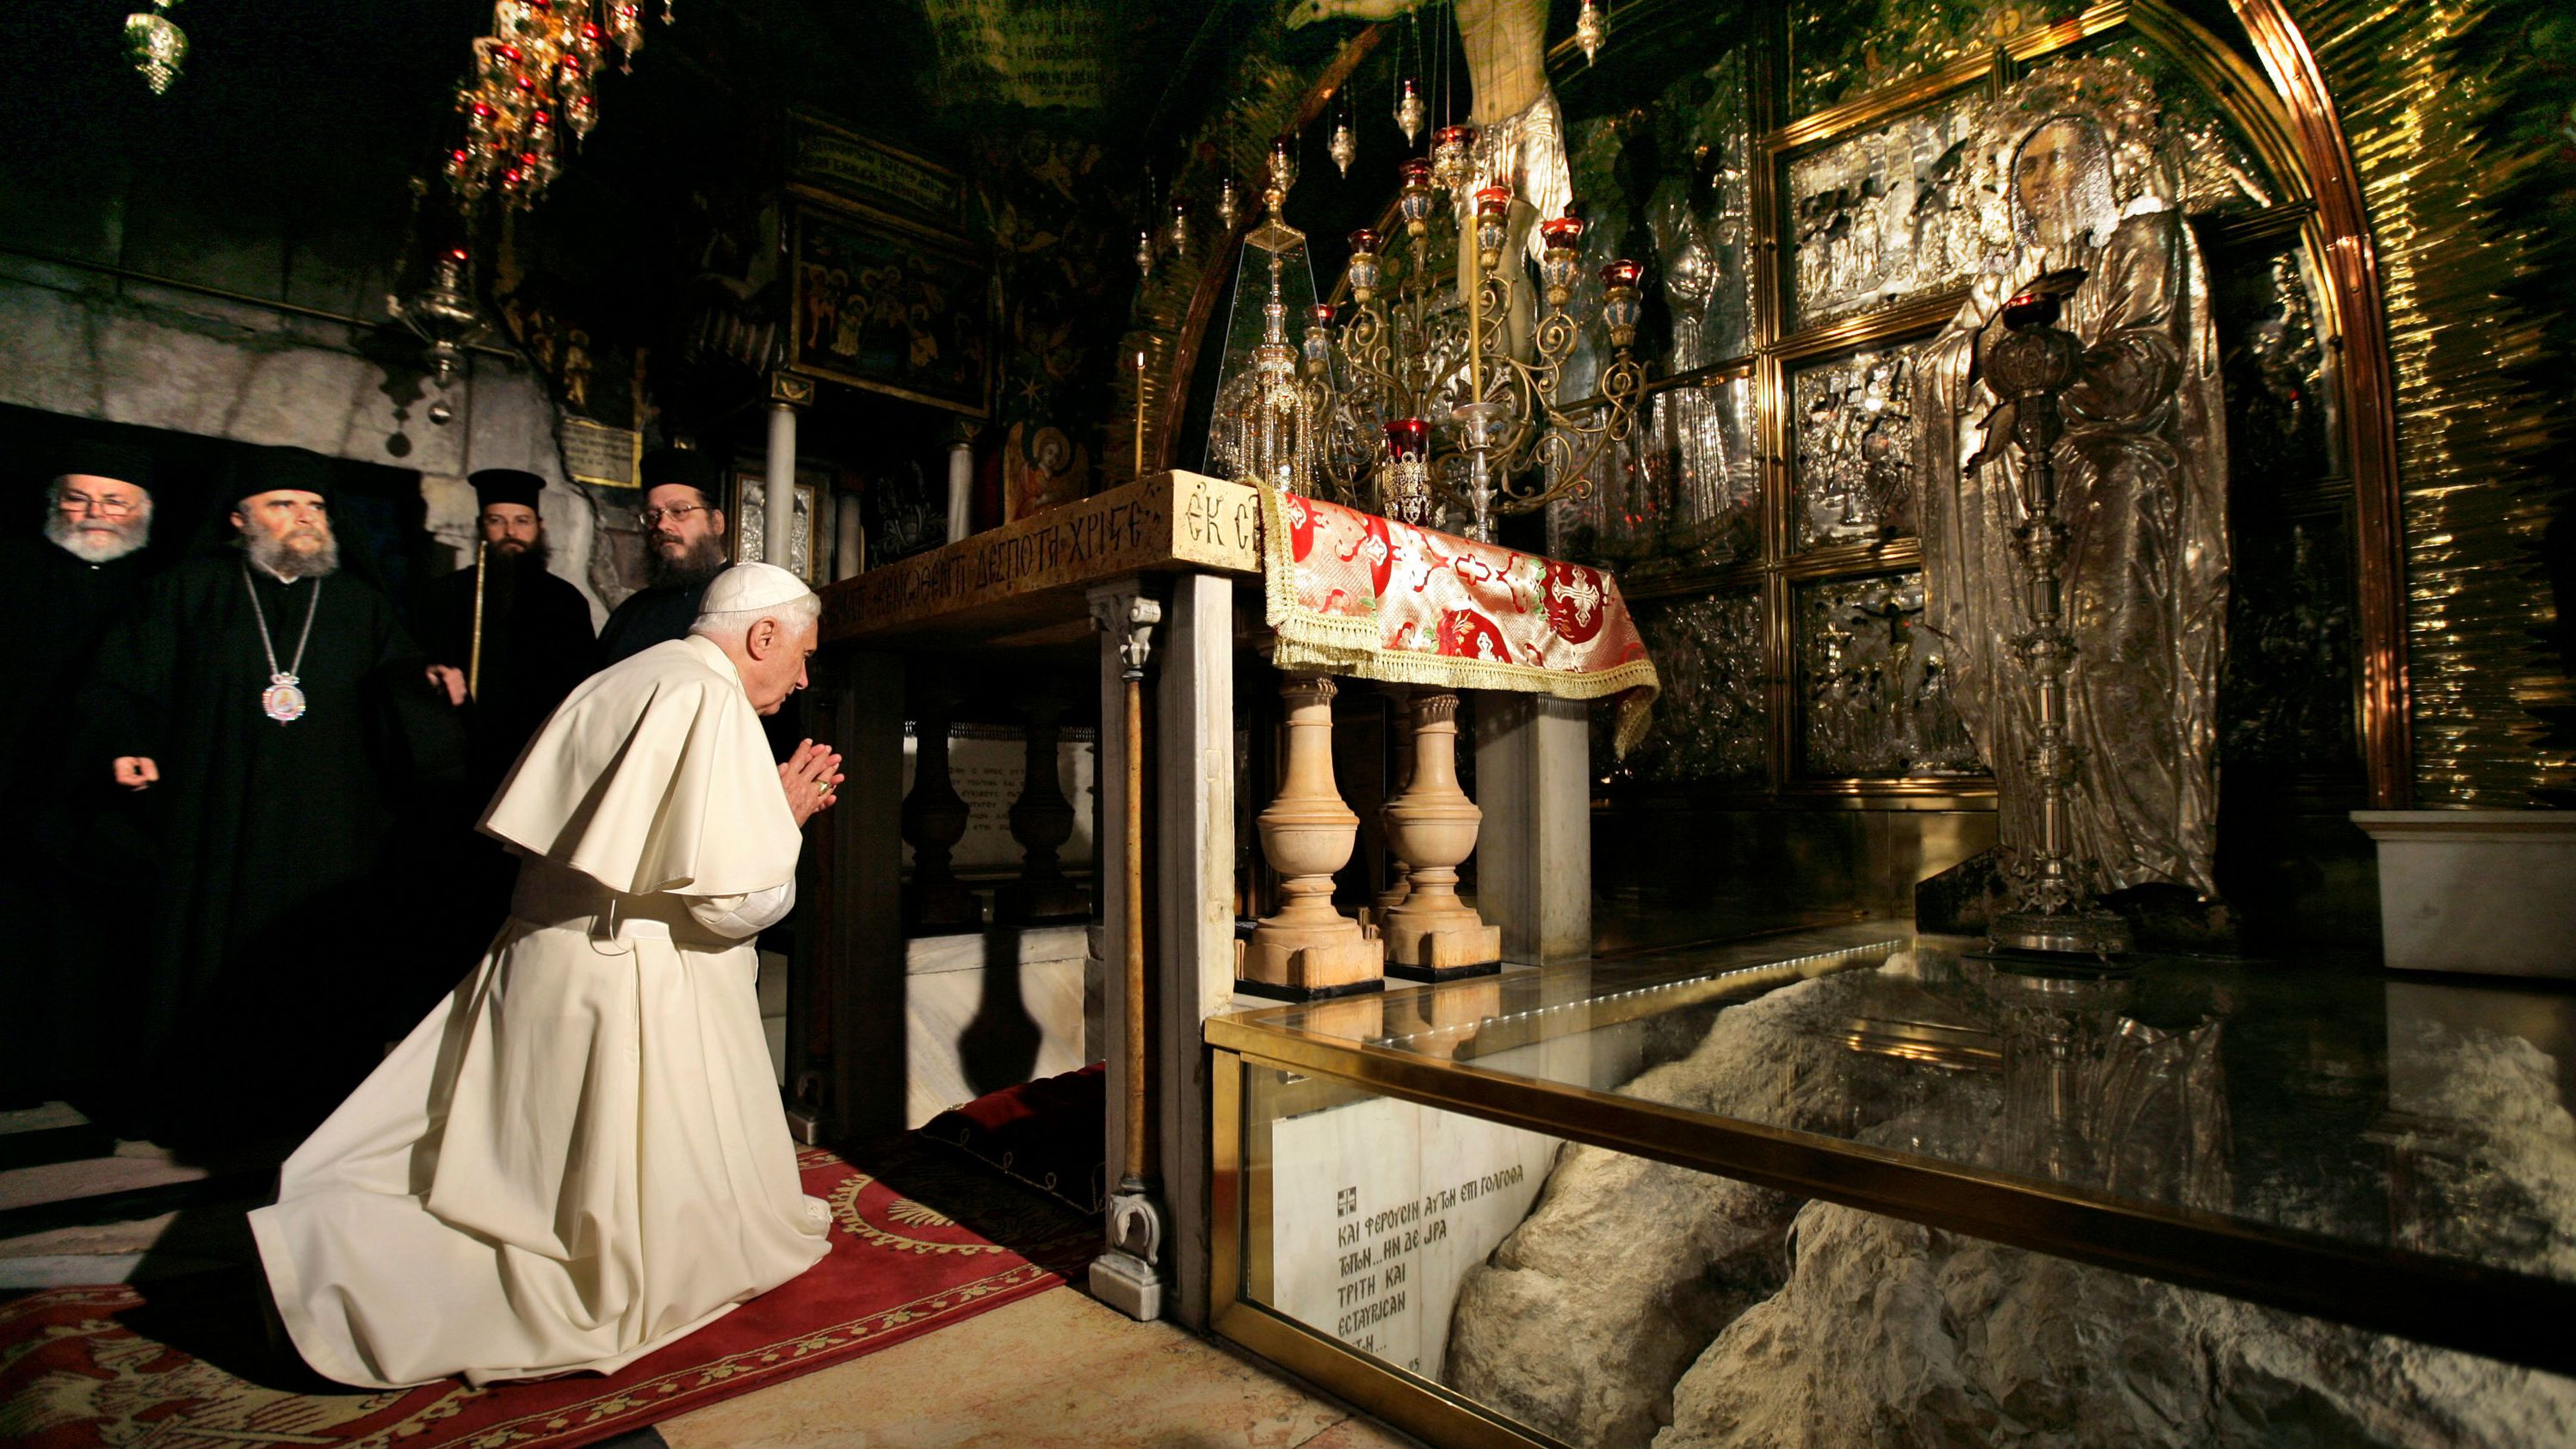 Benedict prays in the Church of the Holy Sepulcher during his trip to Jerusalem's Old City in 2009.